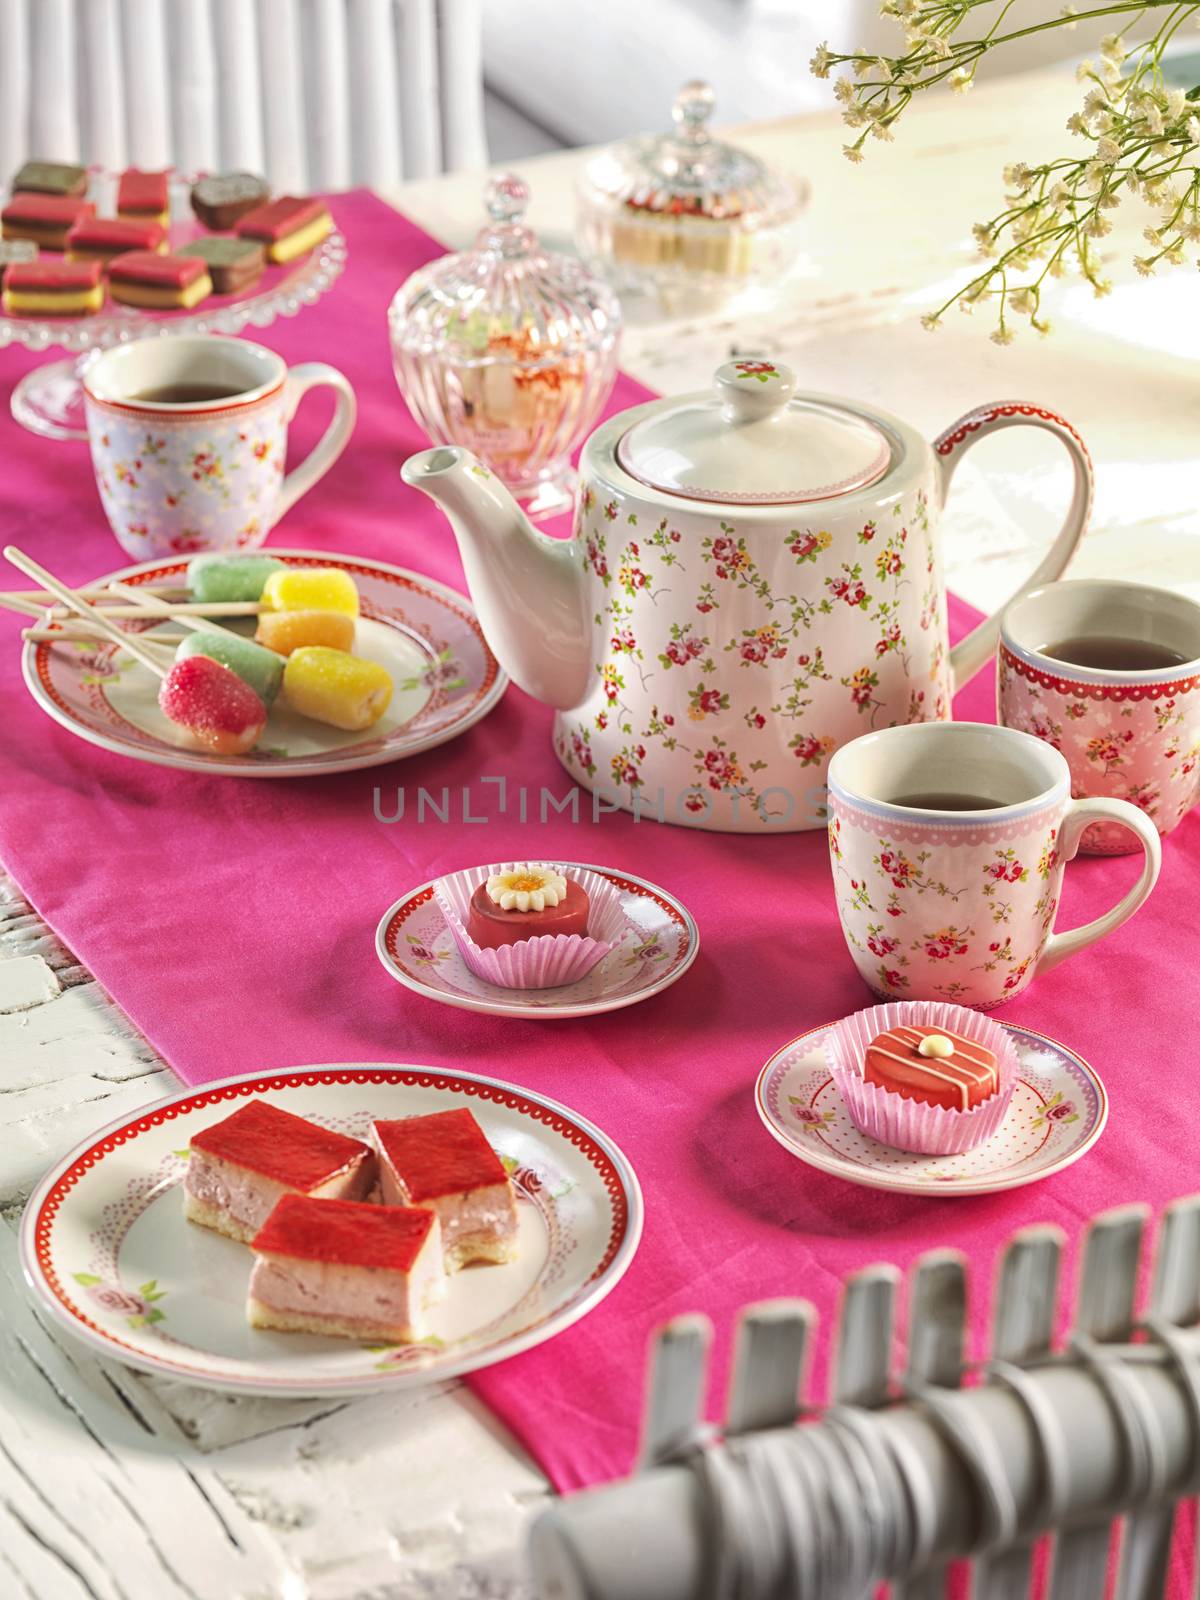 high tea on a table with a pink tablecloth